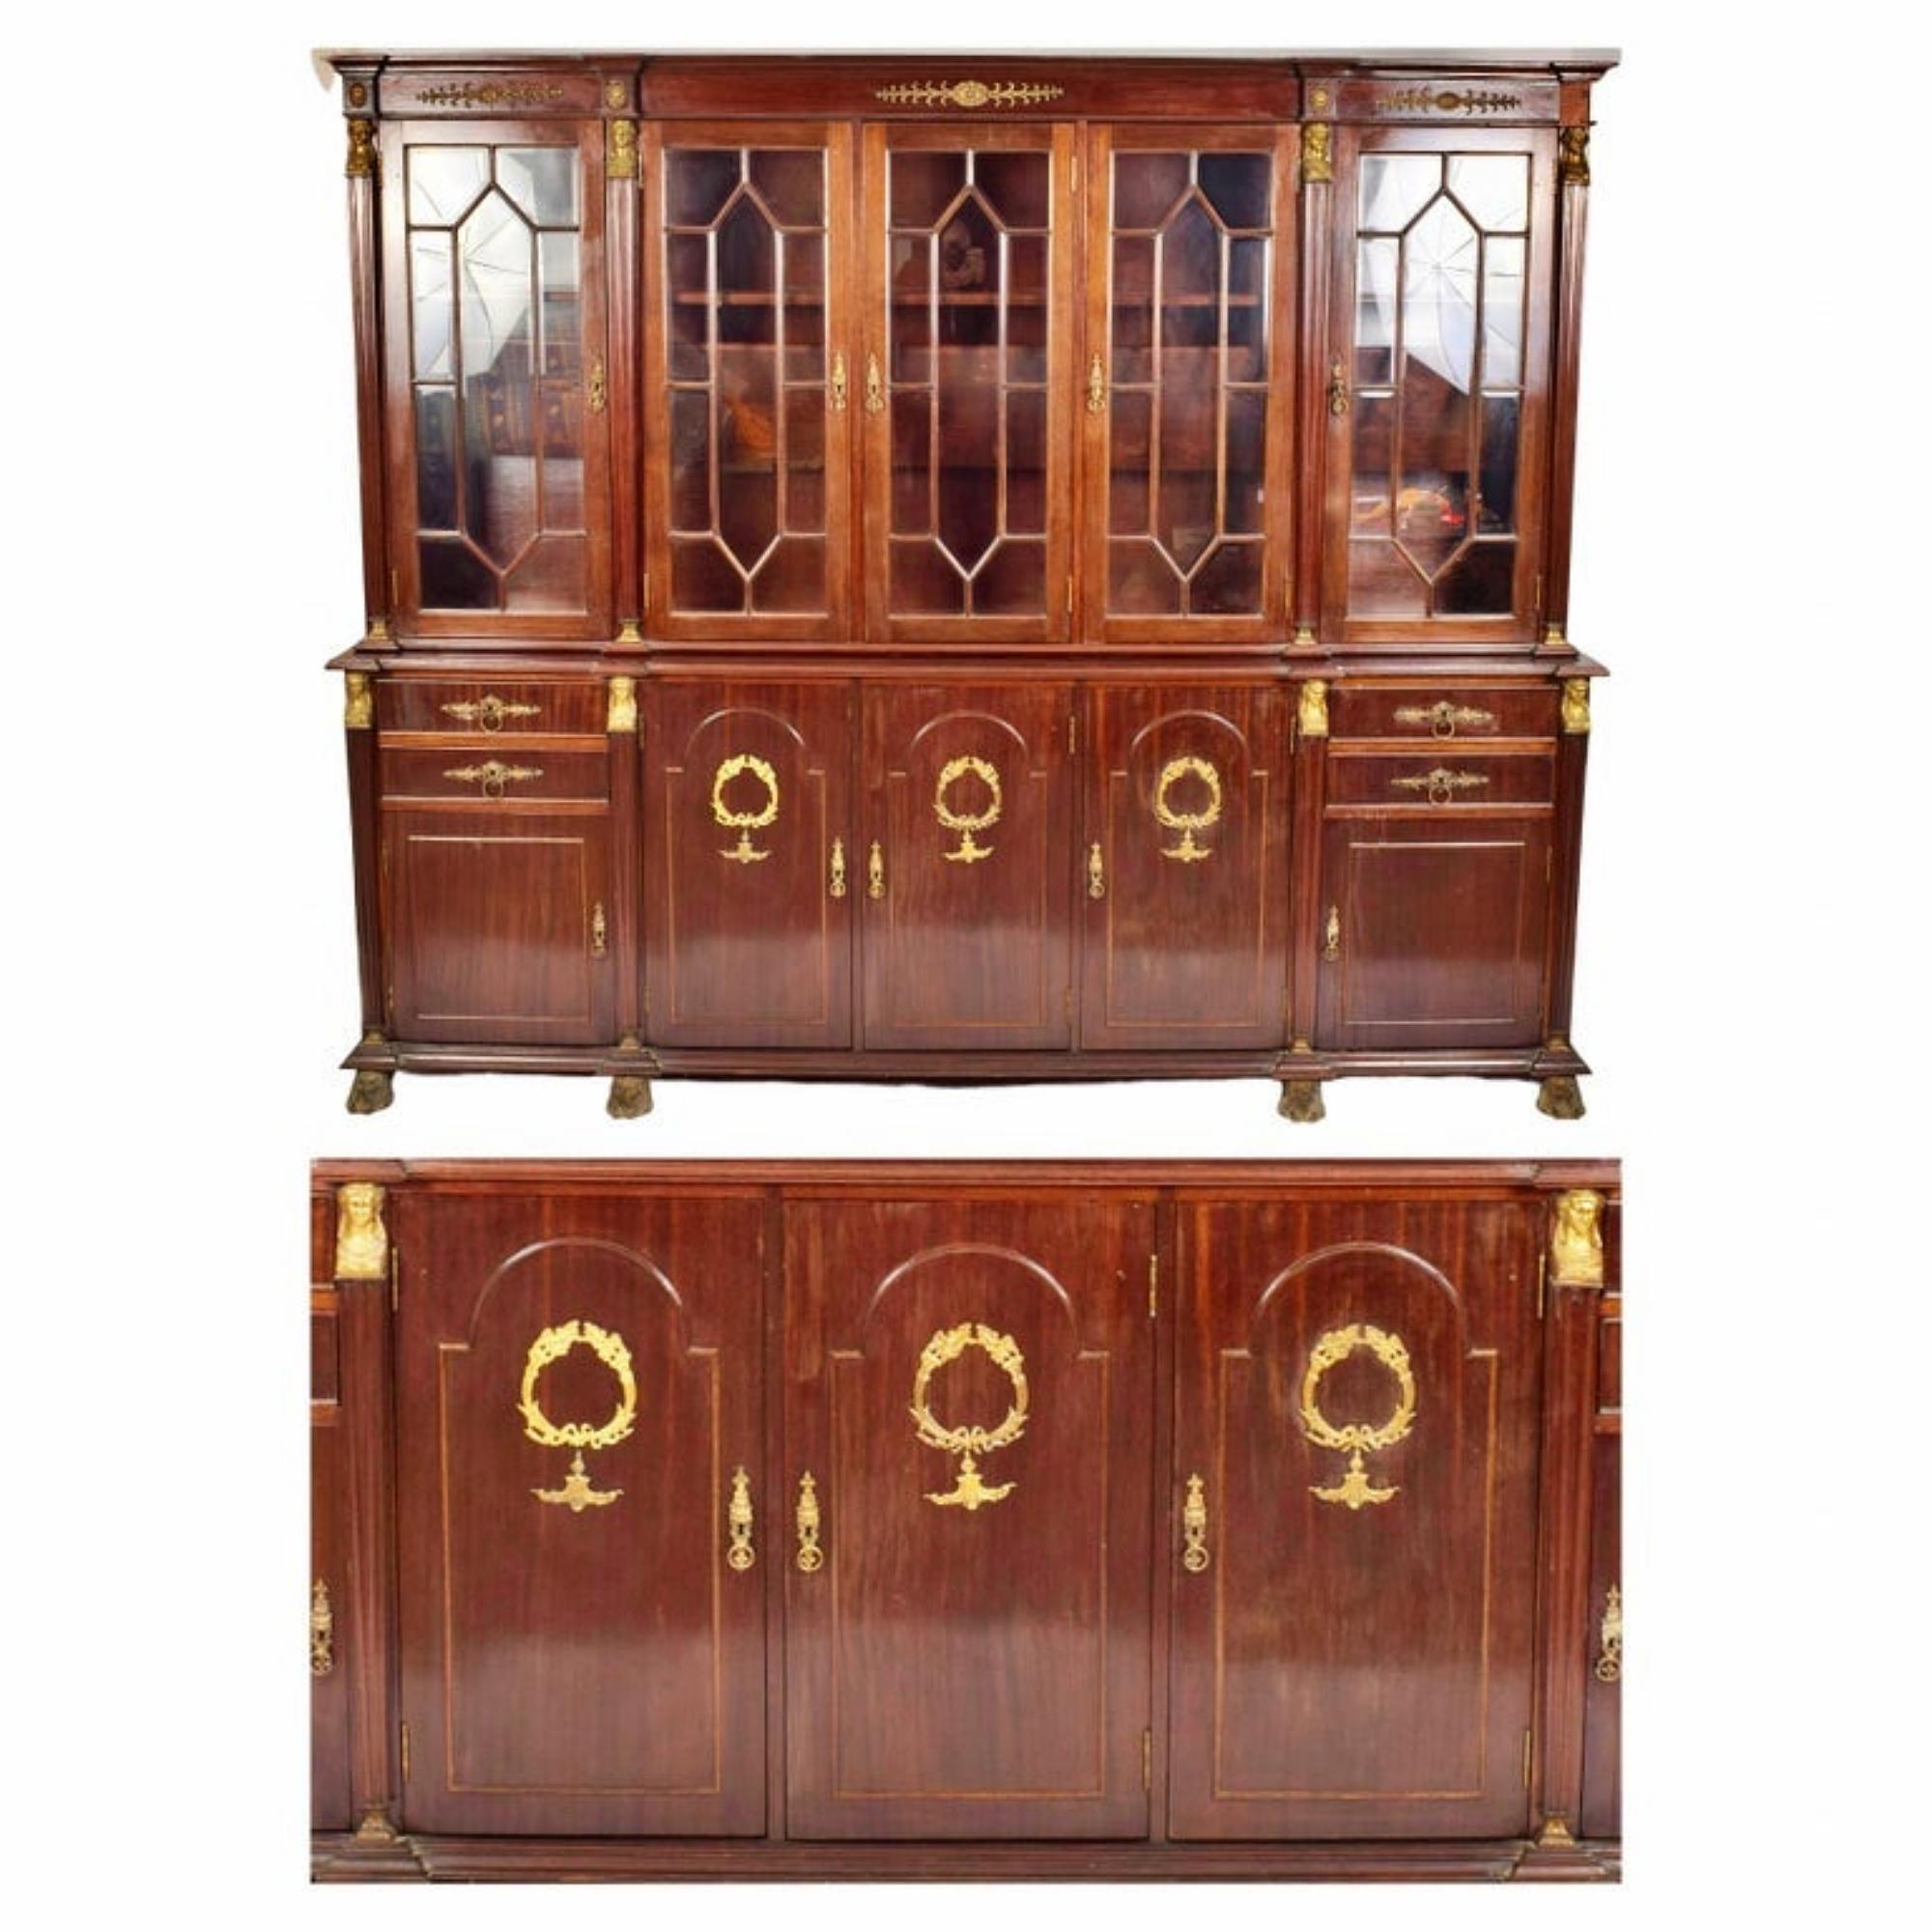 Cupboard
Empire taste 19/20th century, France.

Mahogany, mahogany veneer and other hardwoods.
Upper body with four glass doors and pediment cymbal, lower body with four drawers and five doors, decoration with gilt bronze applications